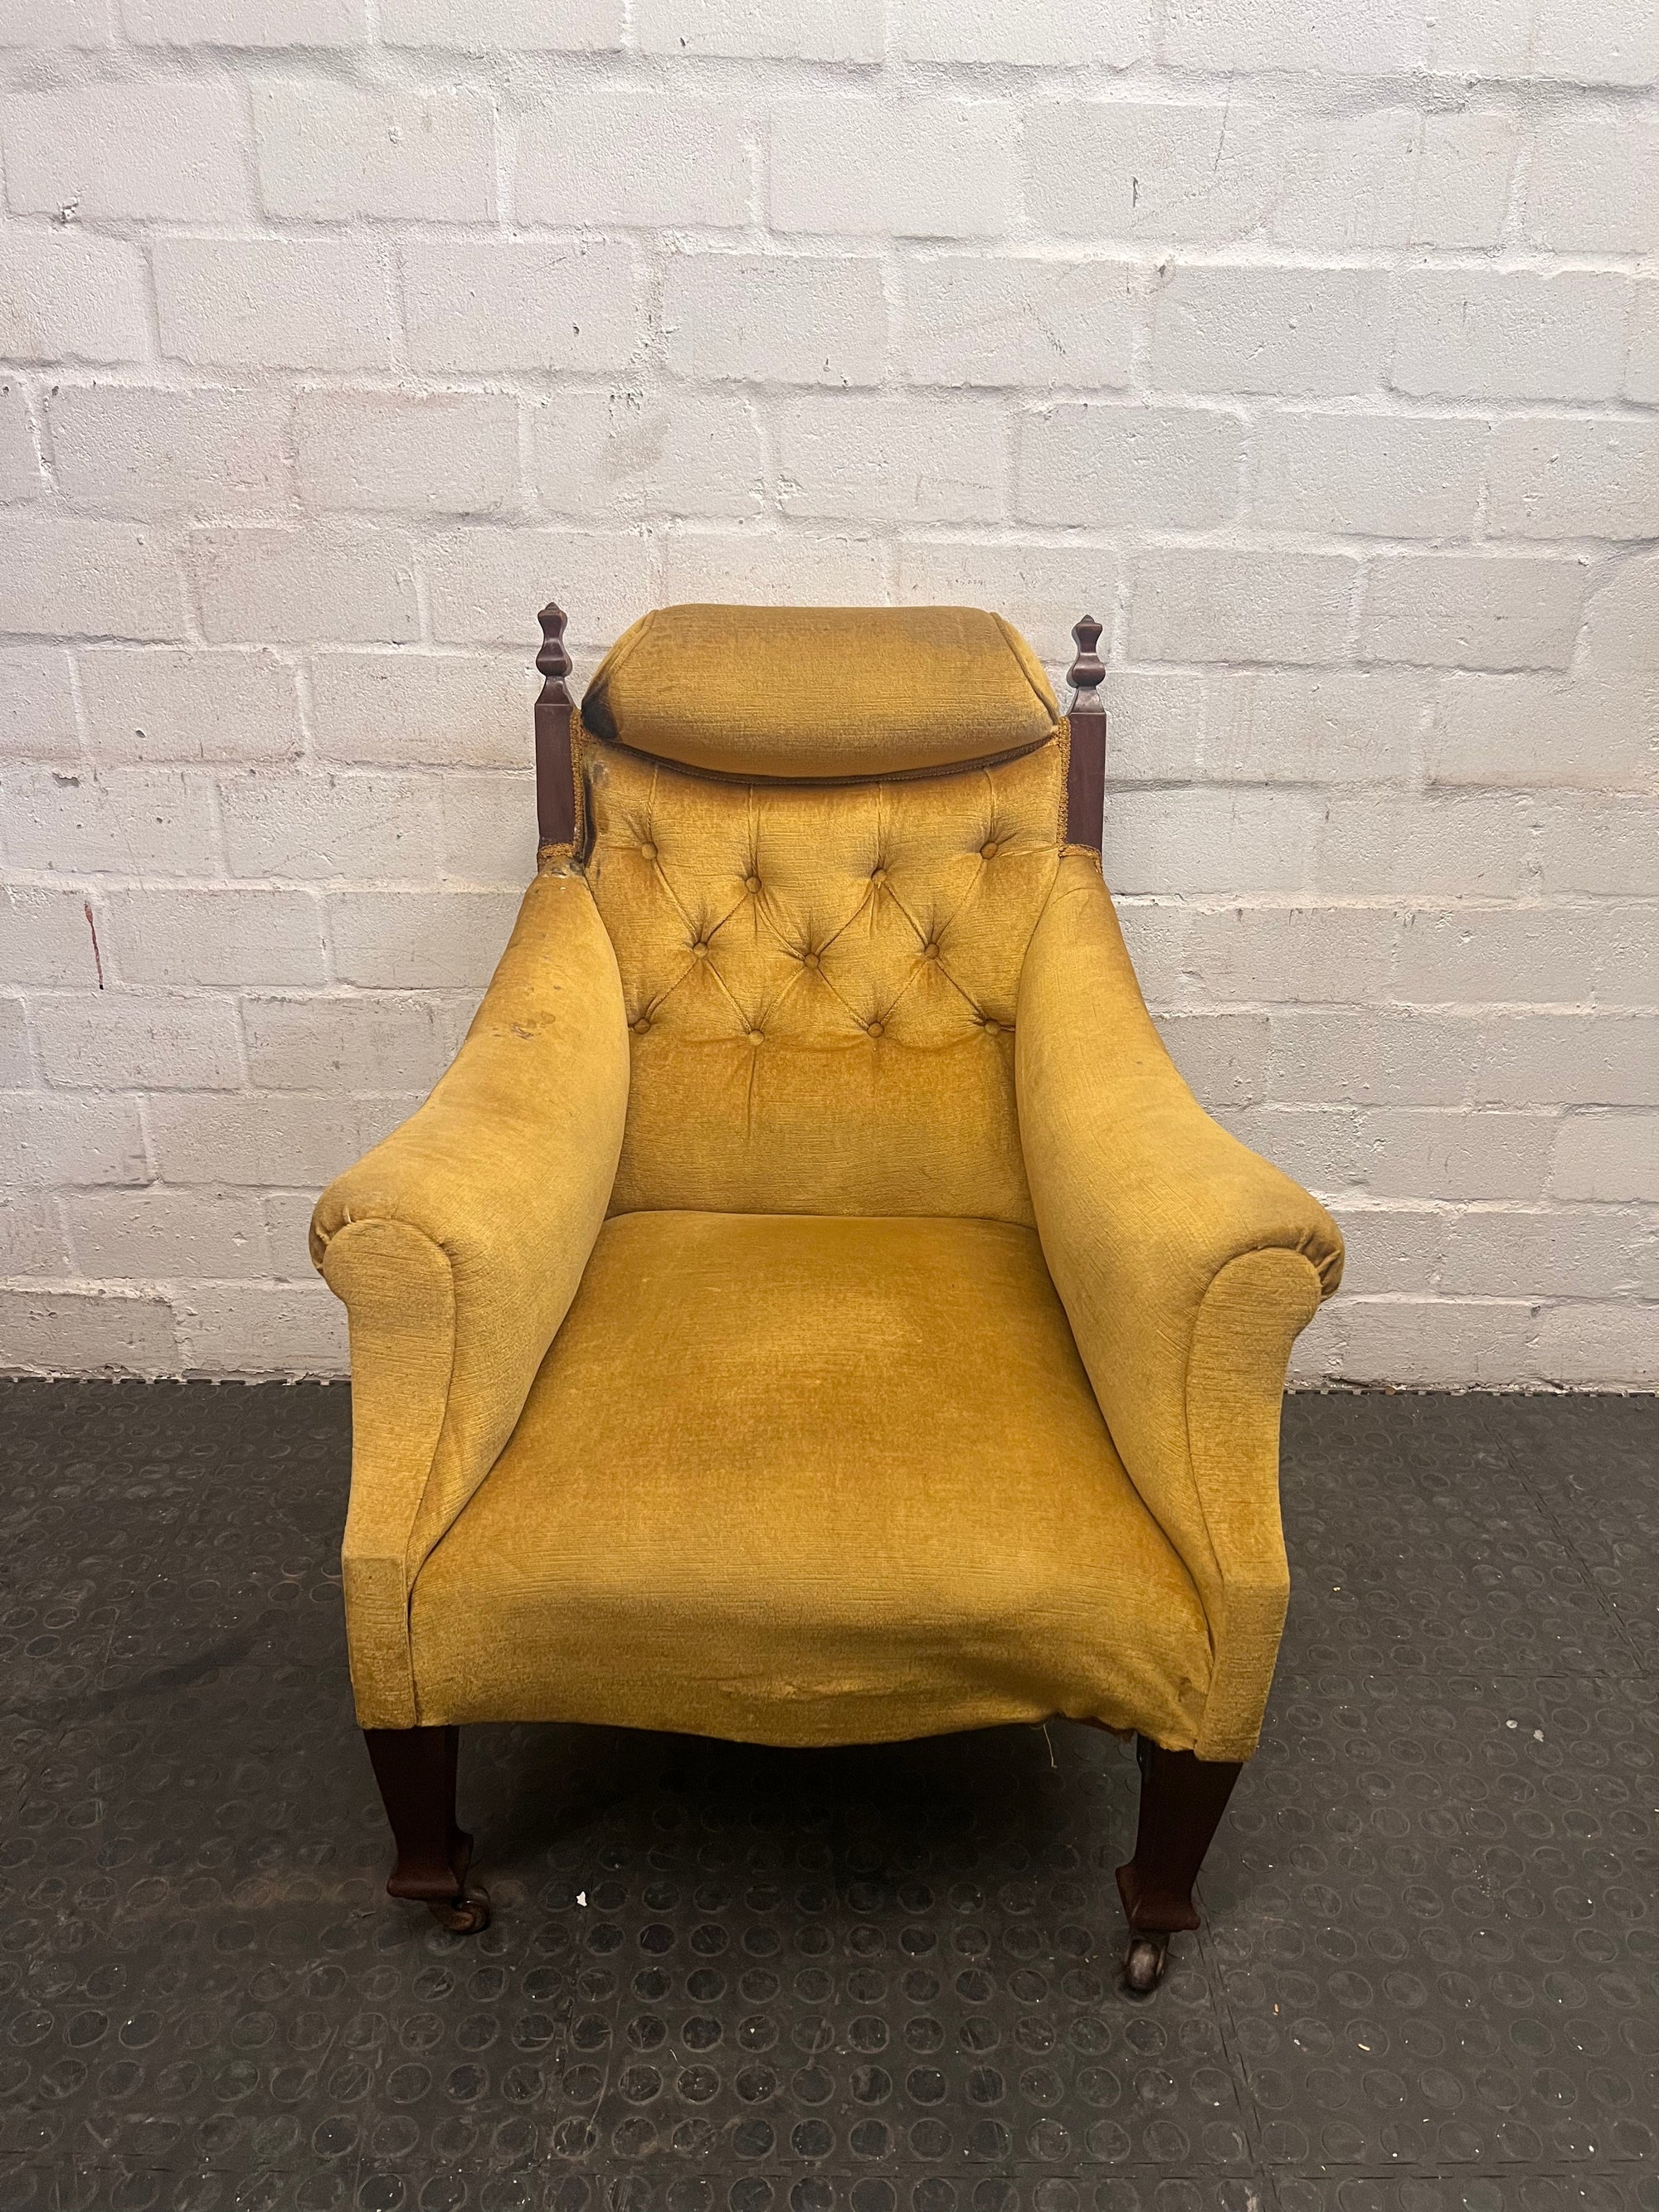 Mustard Velvet Wood Caved Arm Chair - Fabric and Leg Damage